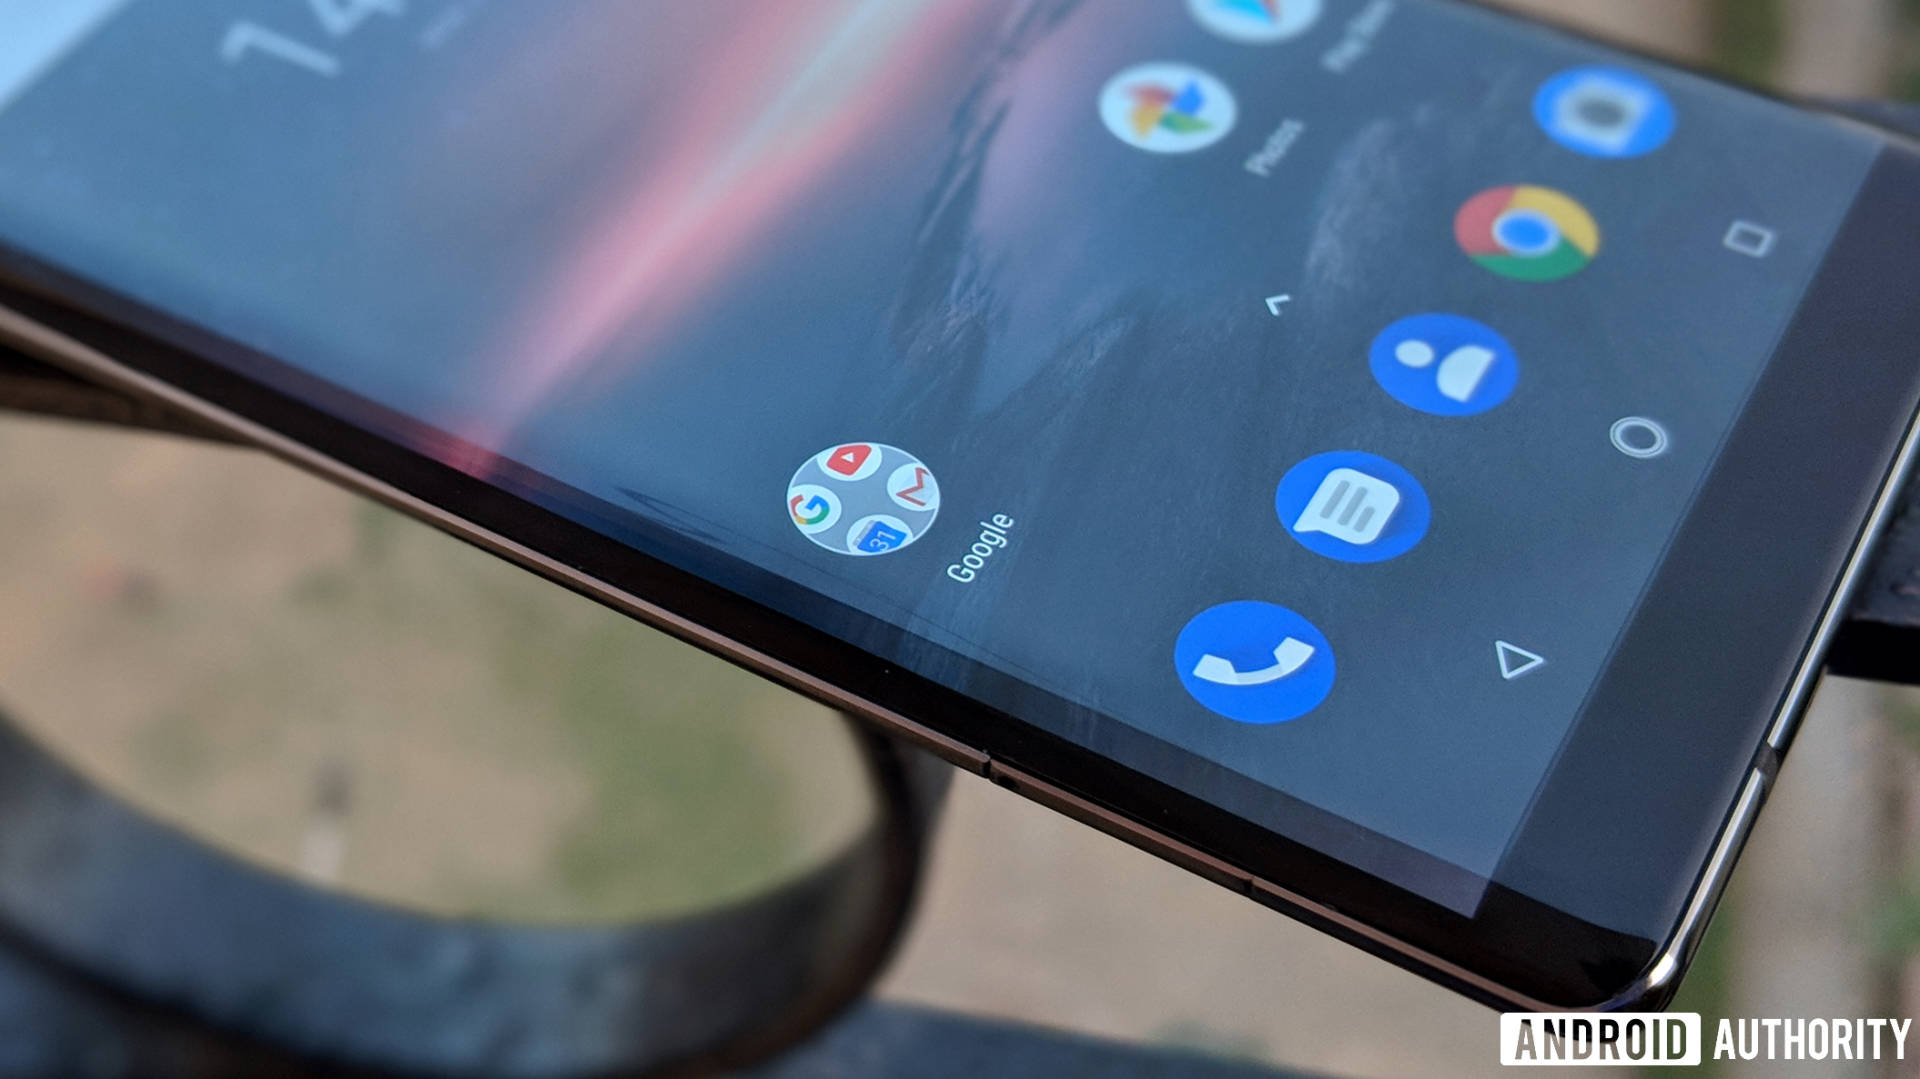 Nokia 8 Sirocco review - curved screen